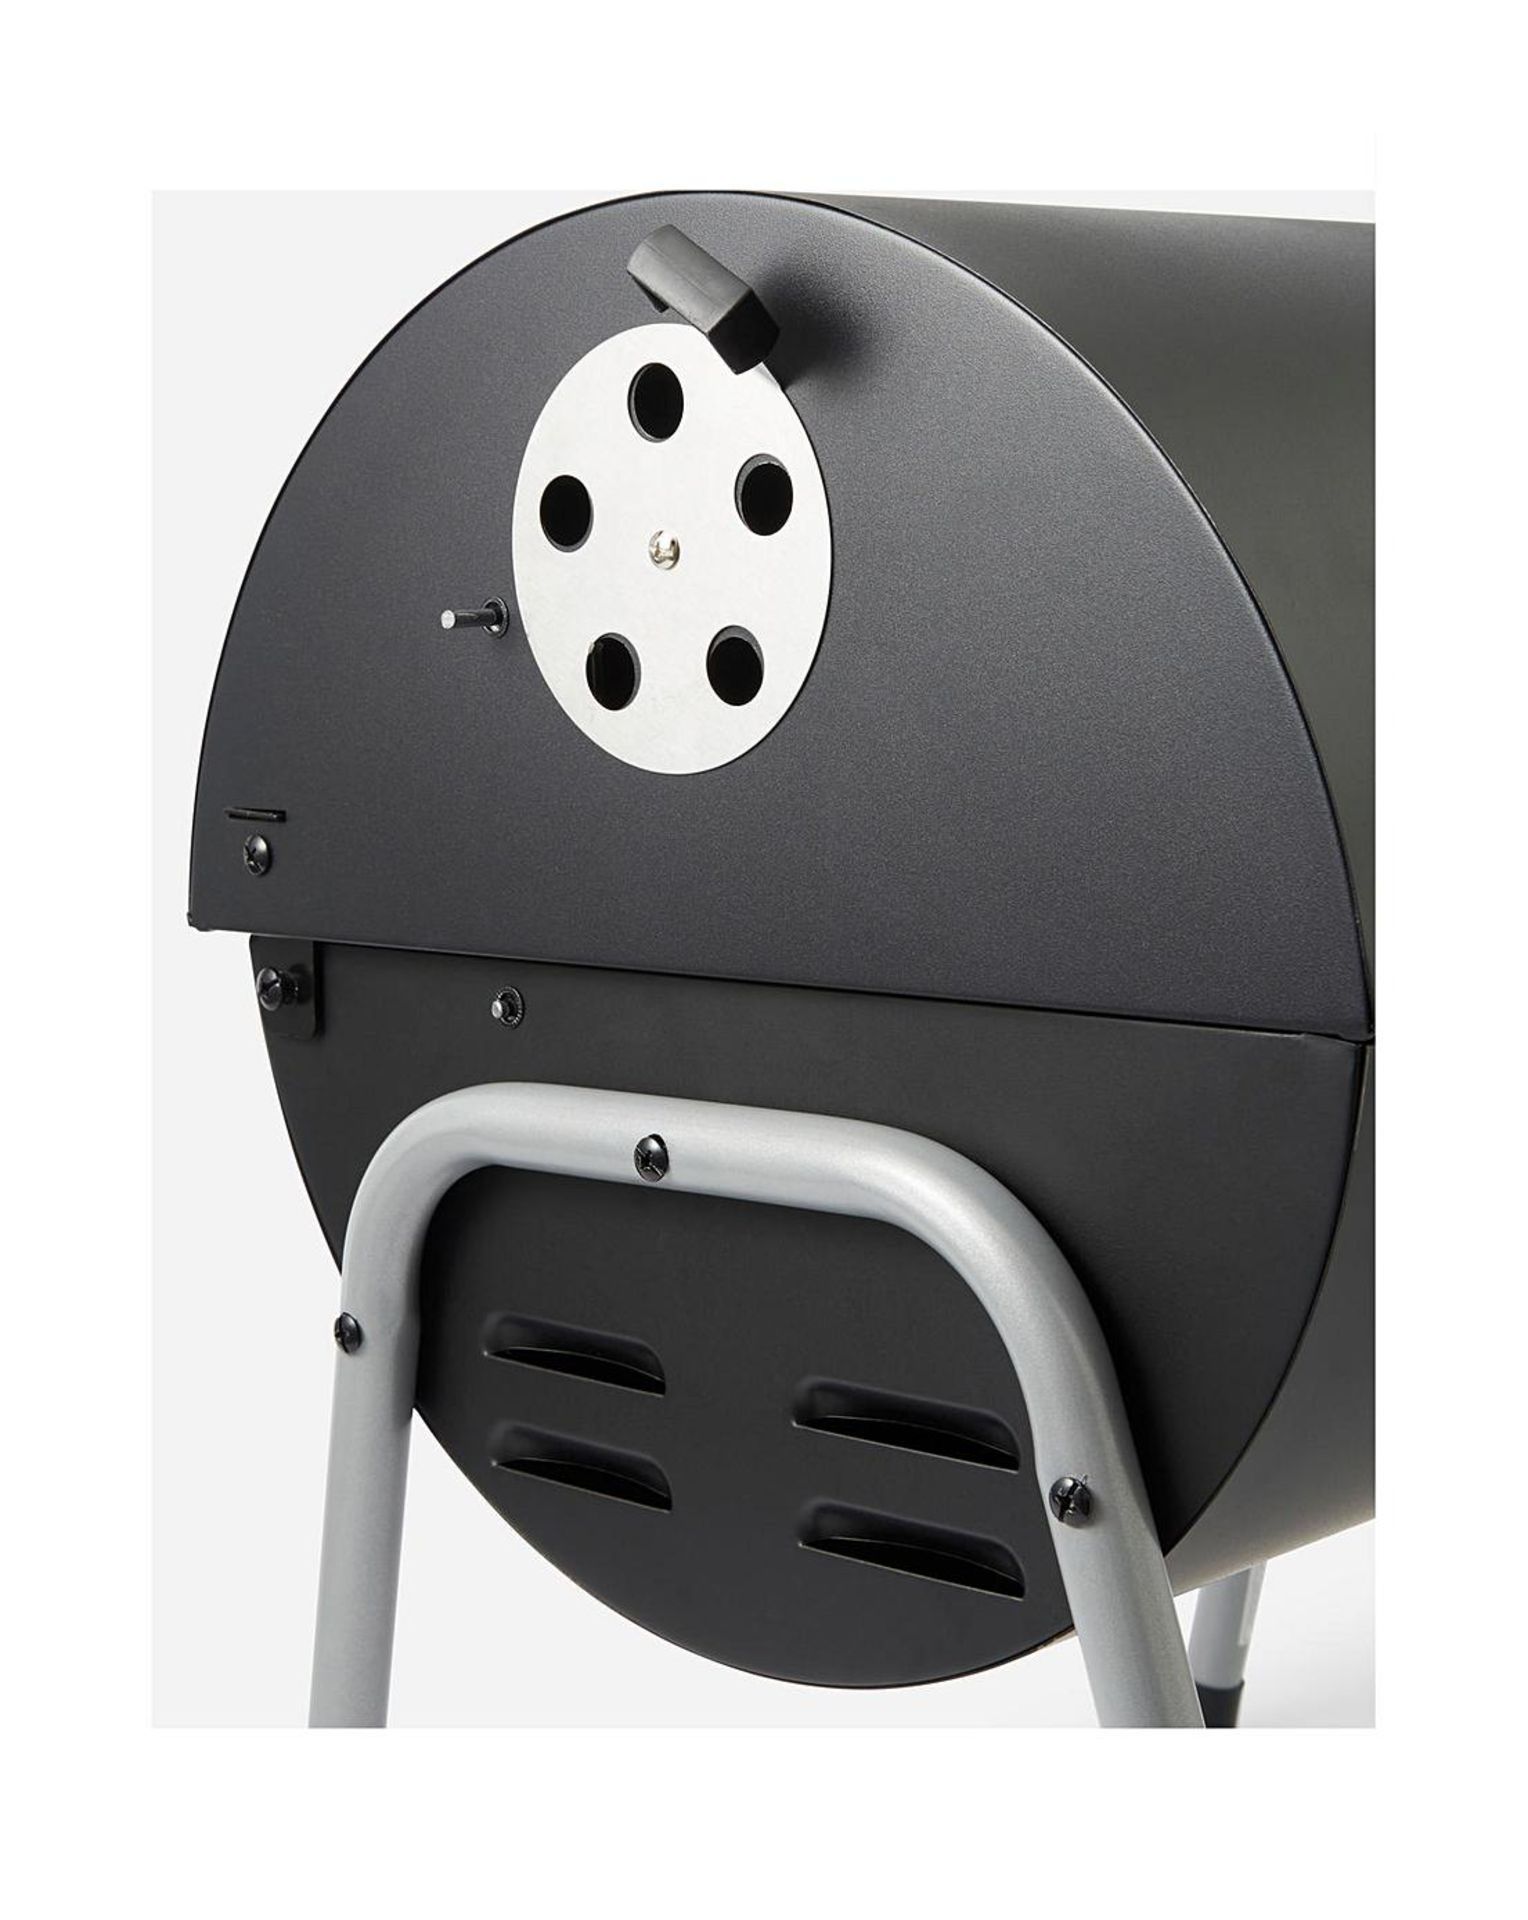 3x BRAND NEW Tabletop Oil Drum Barbeque Grill. RRP £59.99 EACH. Black steel firebowl with enamel - Bild 4 aus 4